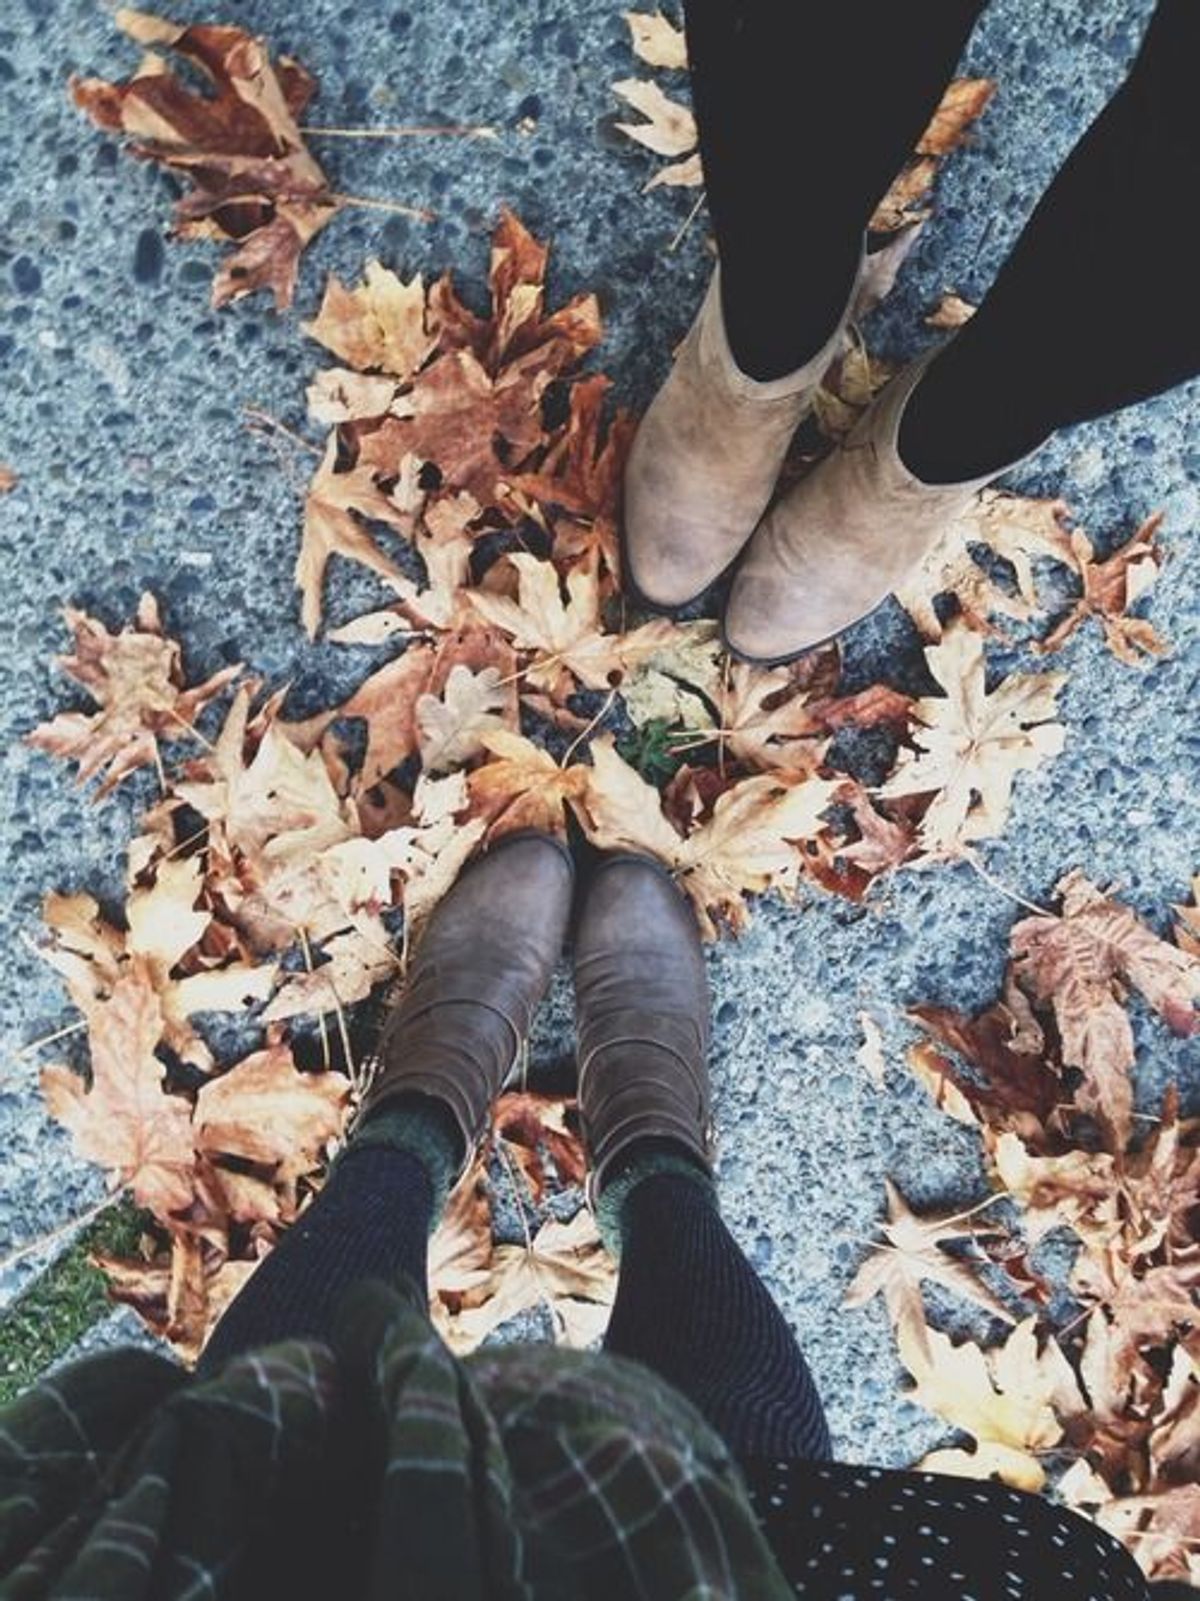 The 7 Stages Of A Basic White Girl In Fall